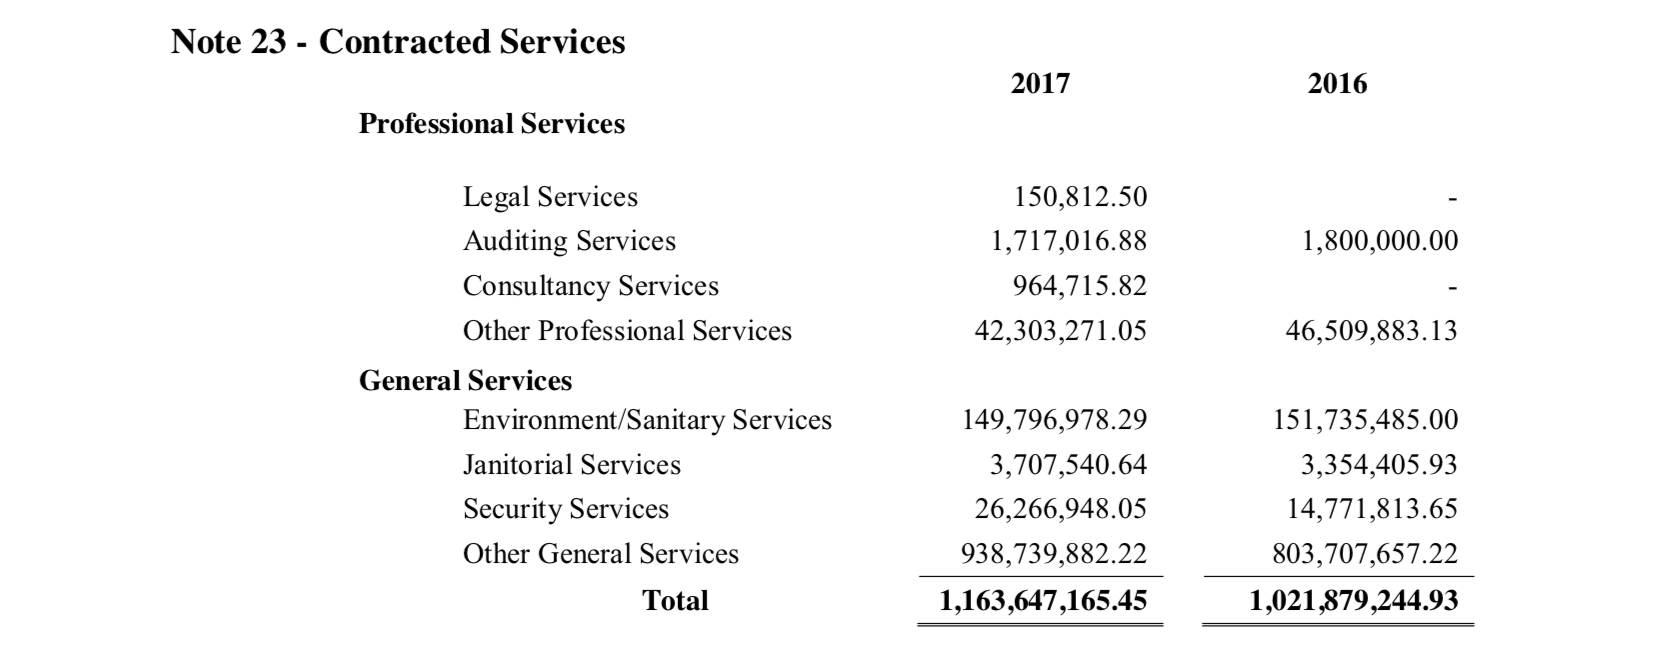 GENERAL SERVICES. In 2017, workers under general services were paid by Davao City 80.6% of the total salaries it paid to all contracted services. Screenshot from the 2017 audit report of Davao City 